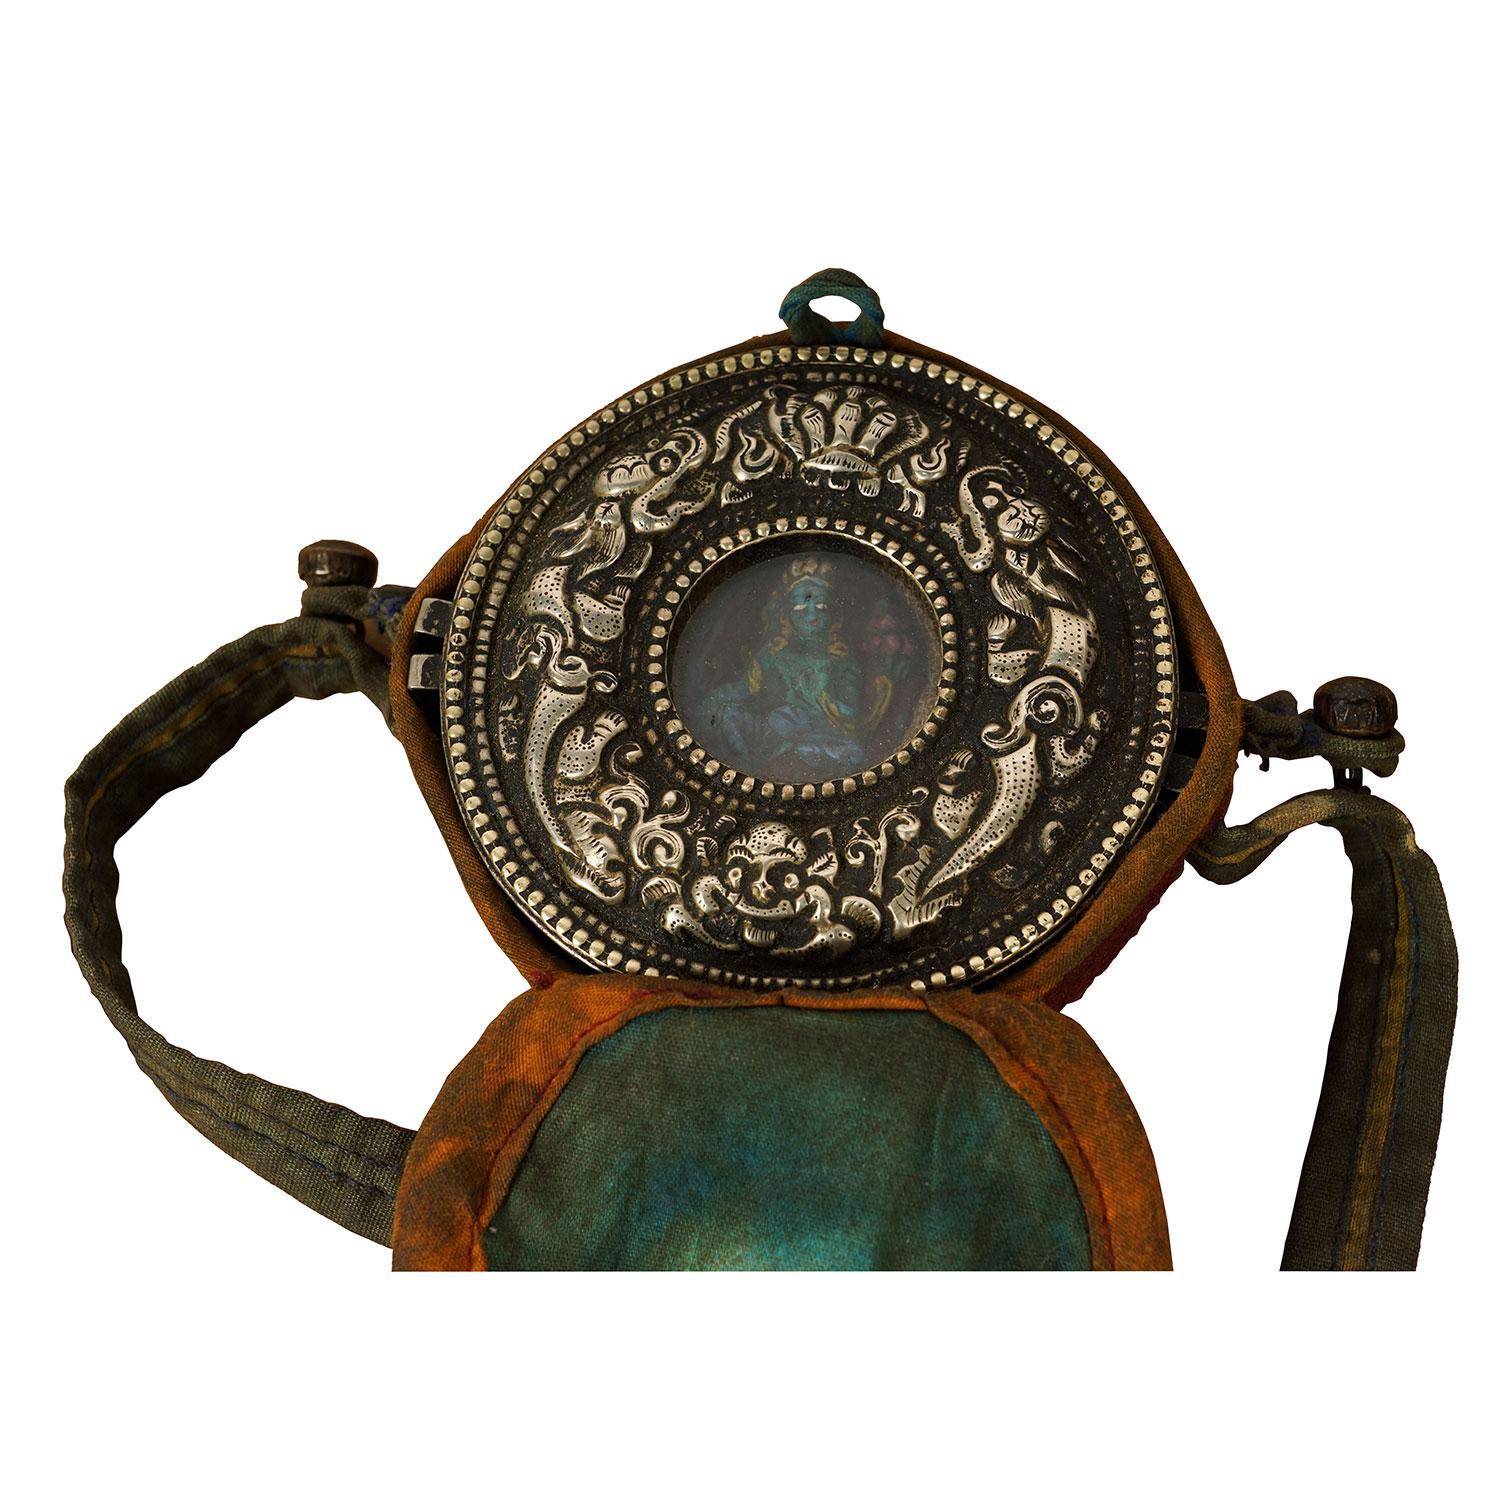 Ghau is a small prayer box worn as pendant by Buddhists as portable shrines which can be pray by prayer during their travel. This Ghau or prayer box made from Tibetan silver with a Turquoise Buddha inside. All hand made and hand carved.

Size: 1